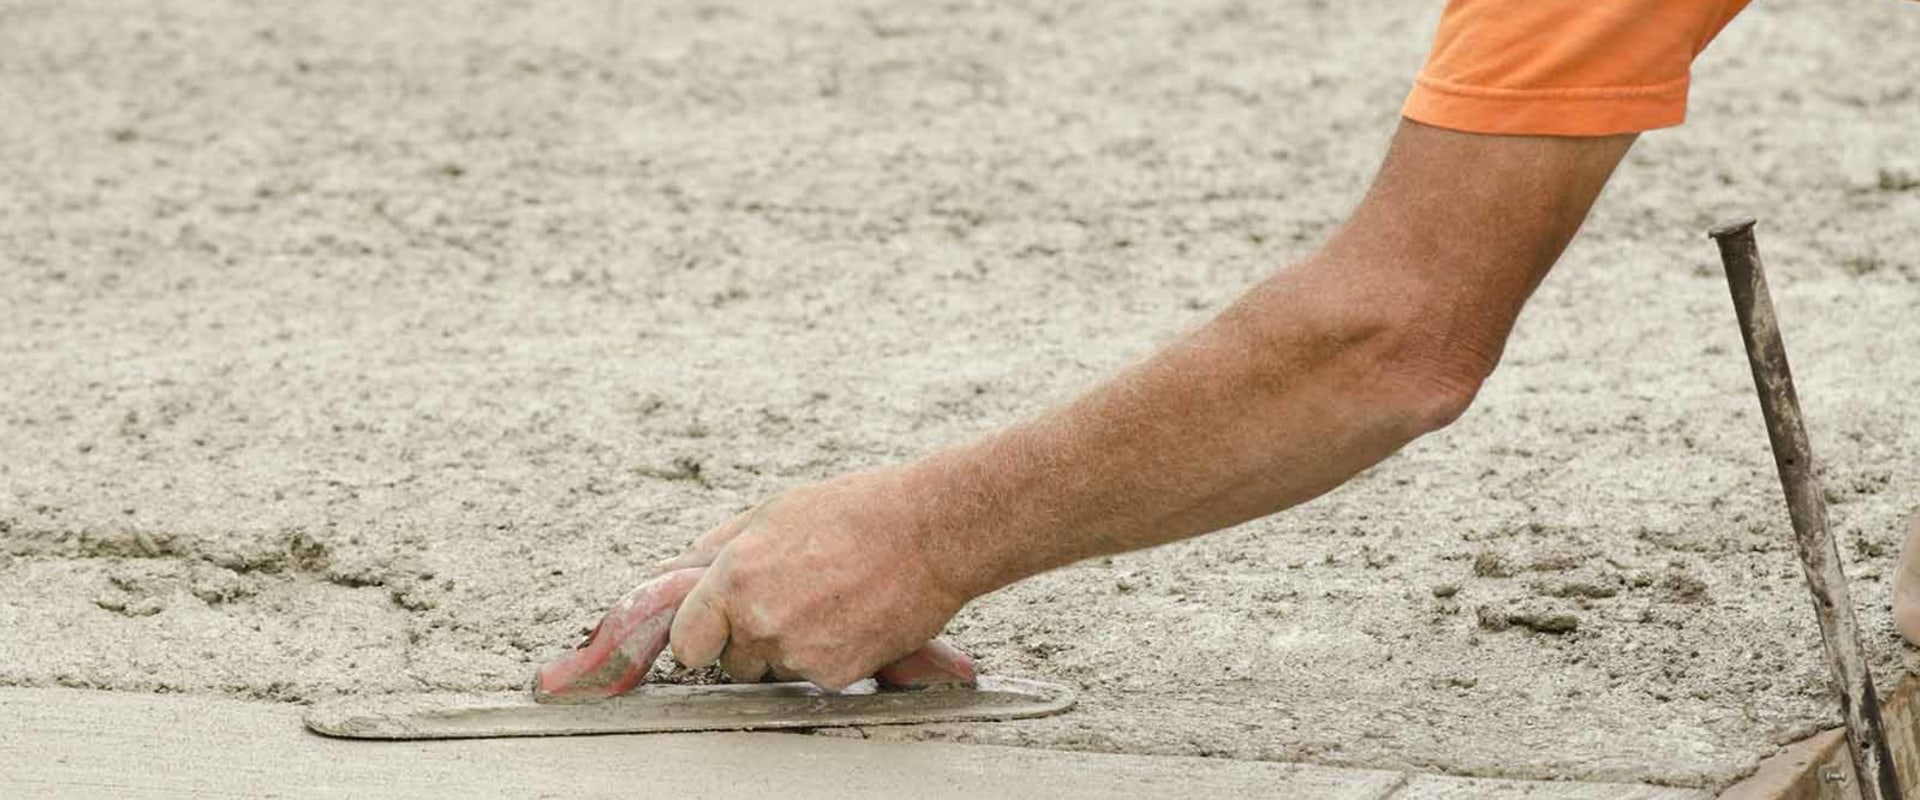 Does Concrete Stick to Concrete? An Expert's Guide